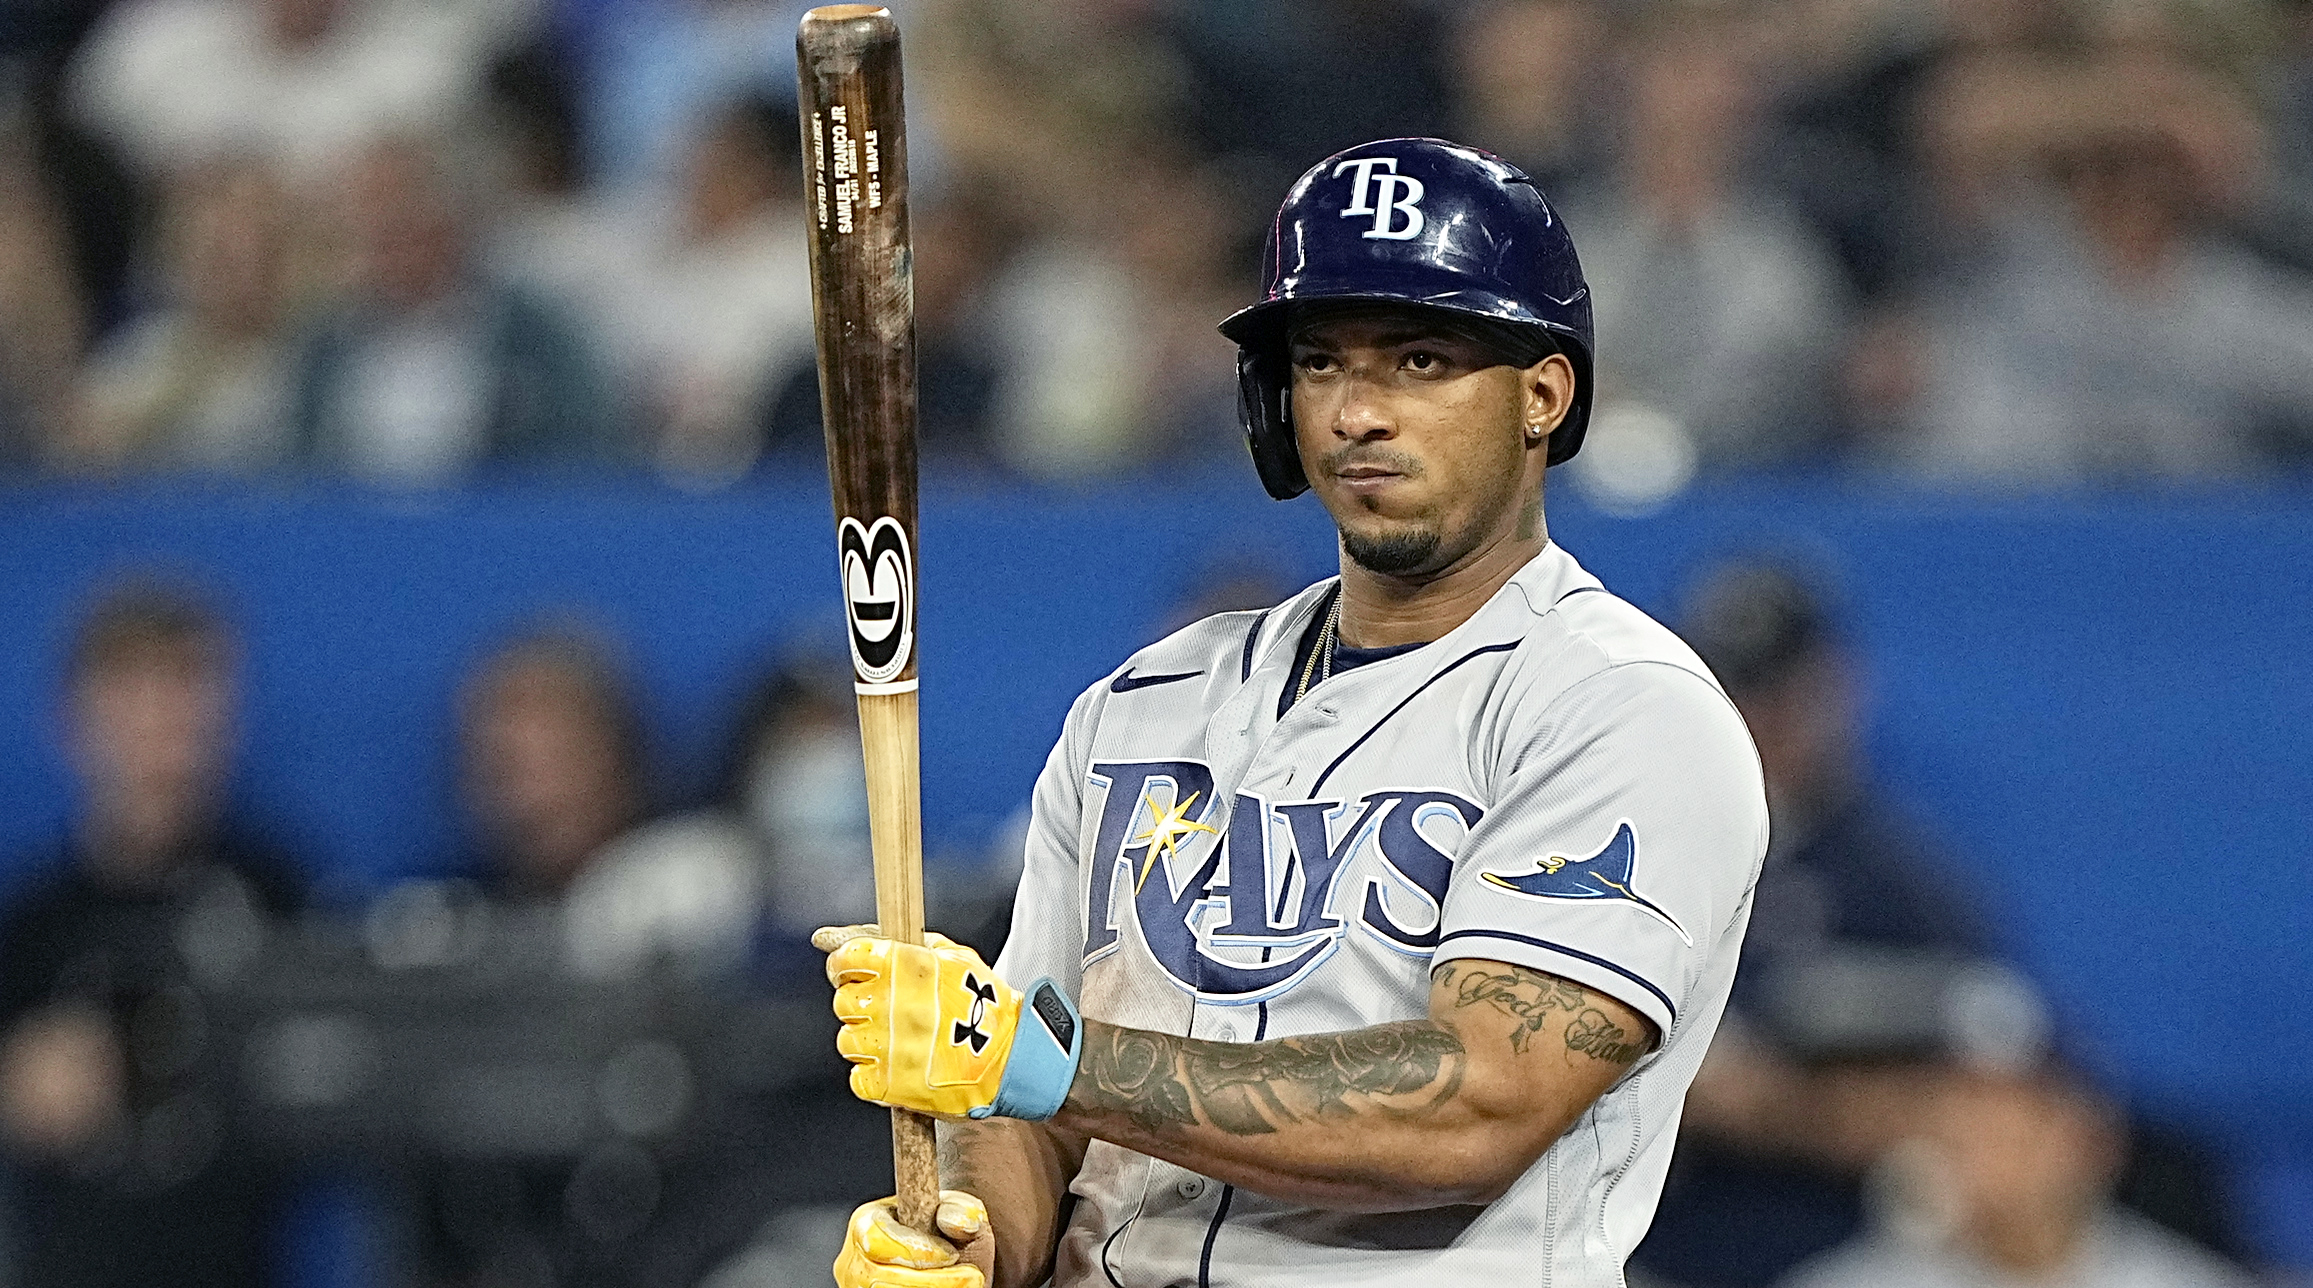 Wander Franco Sits Out of Rays Game Amid Investigation - The New